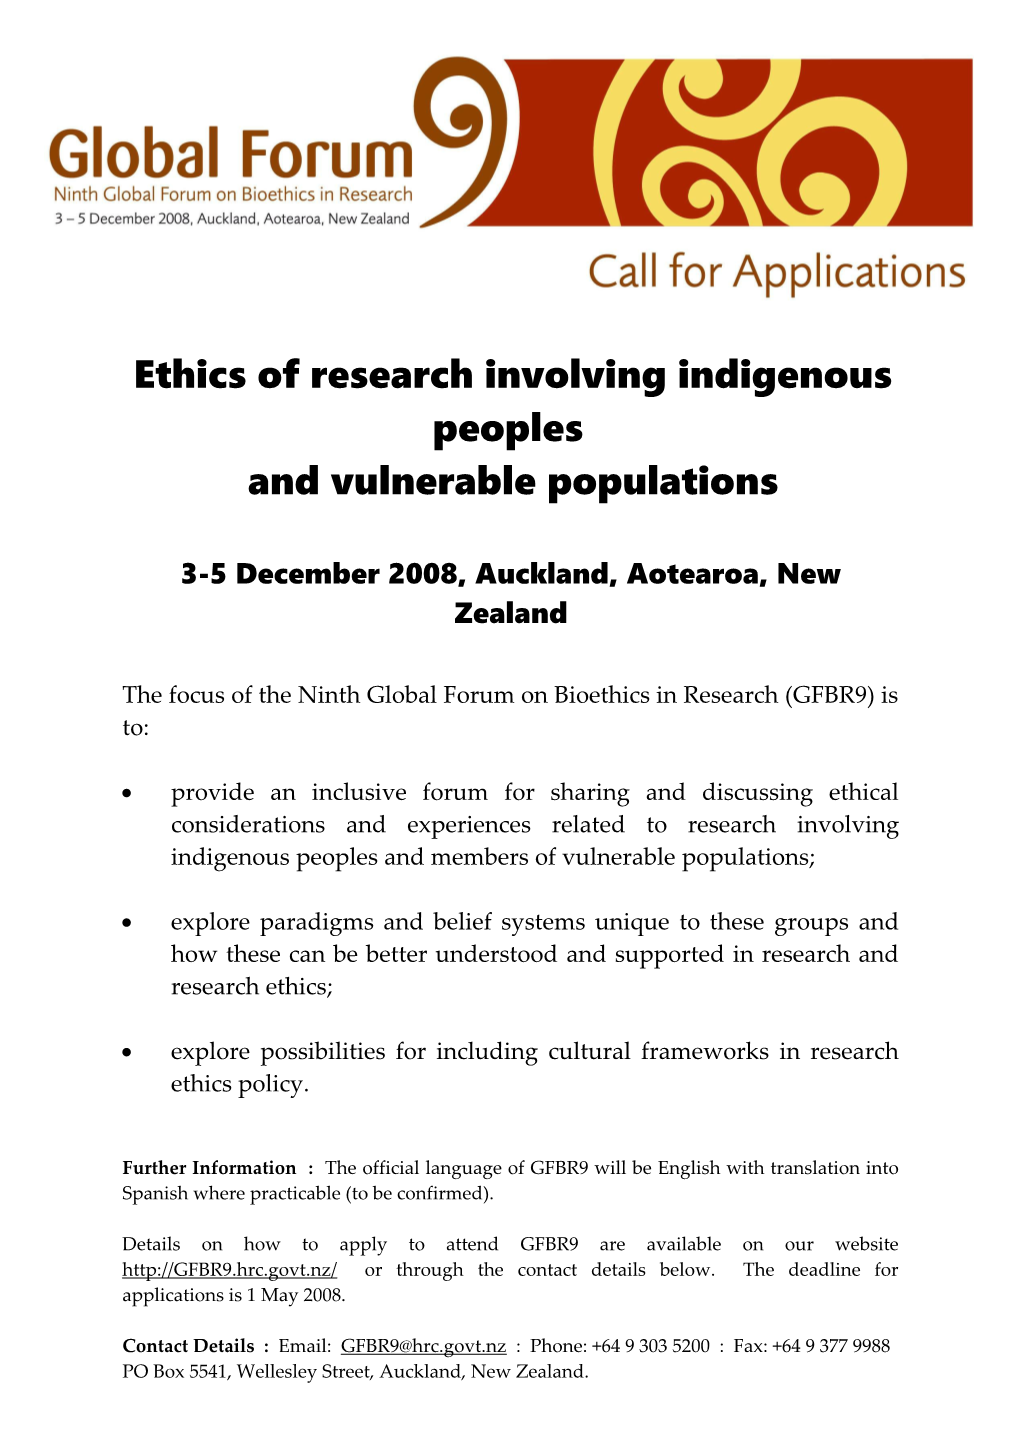 Ethics of Research Involving Indigenous Peoples and Vulnerable Populations